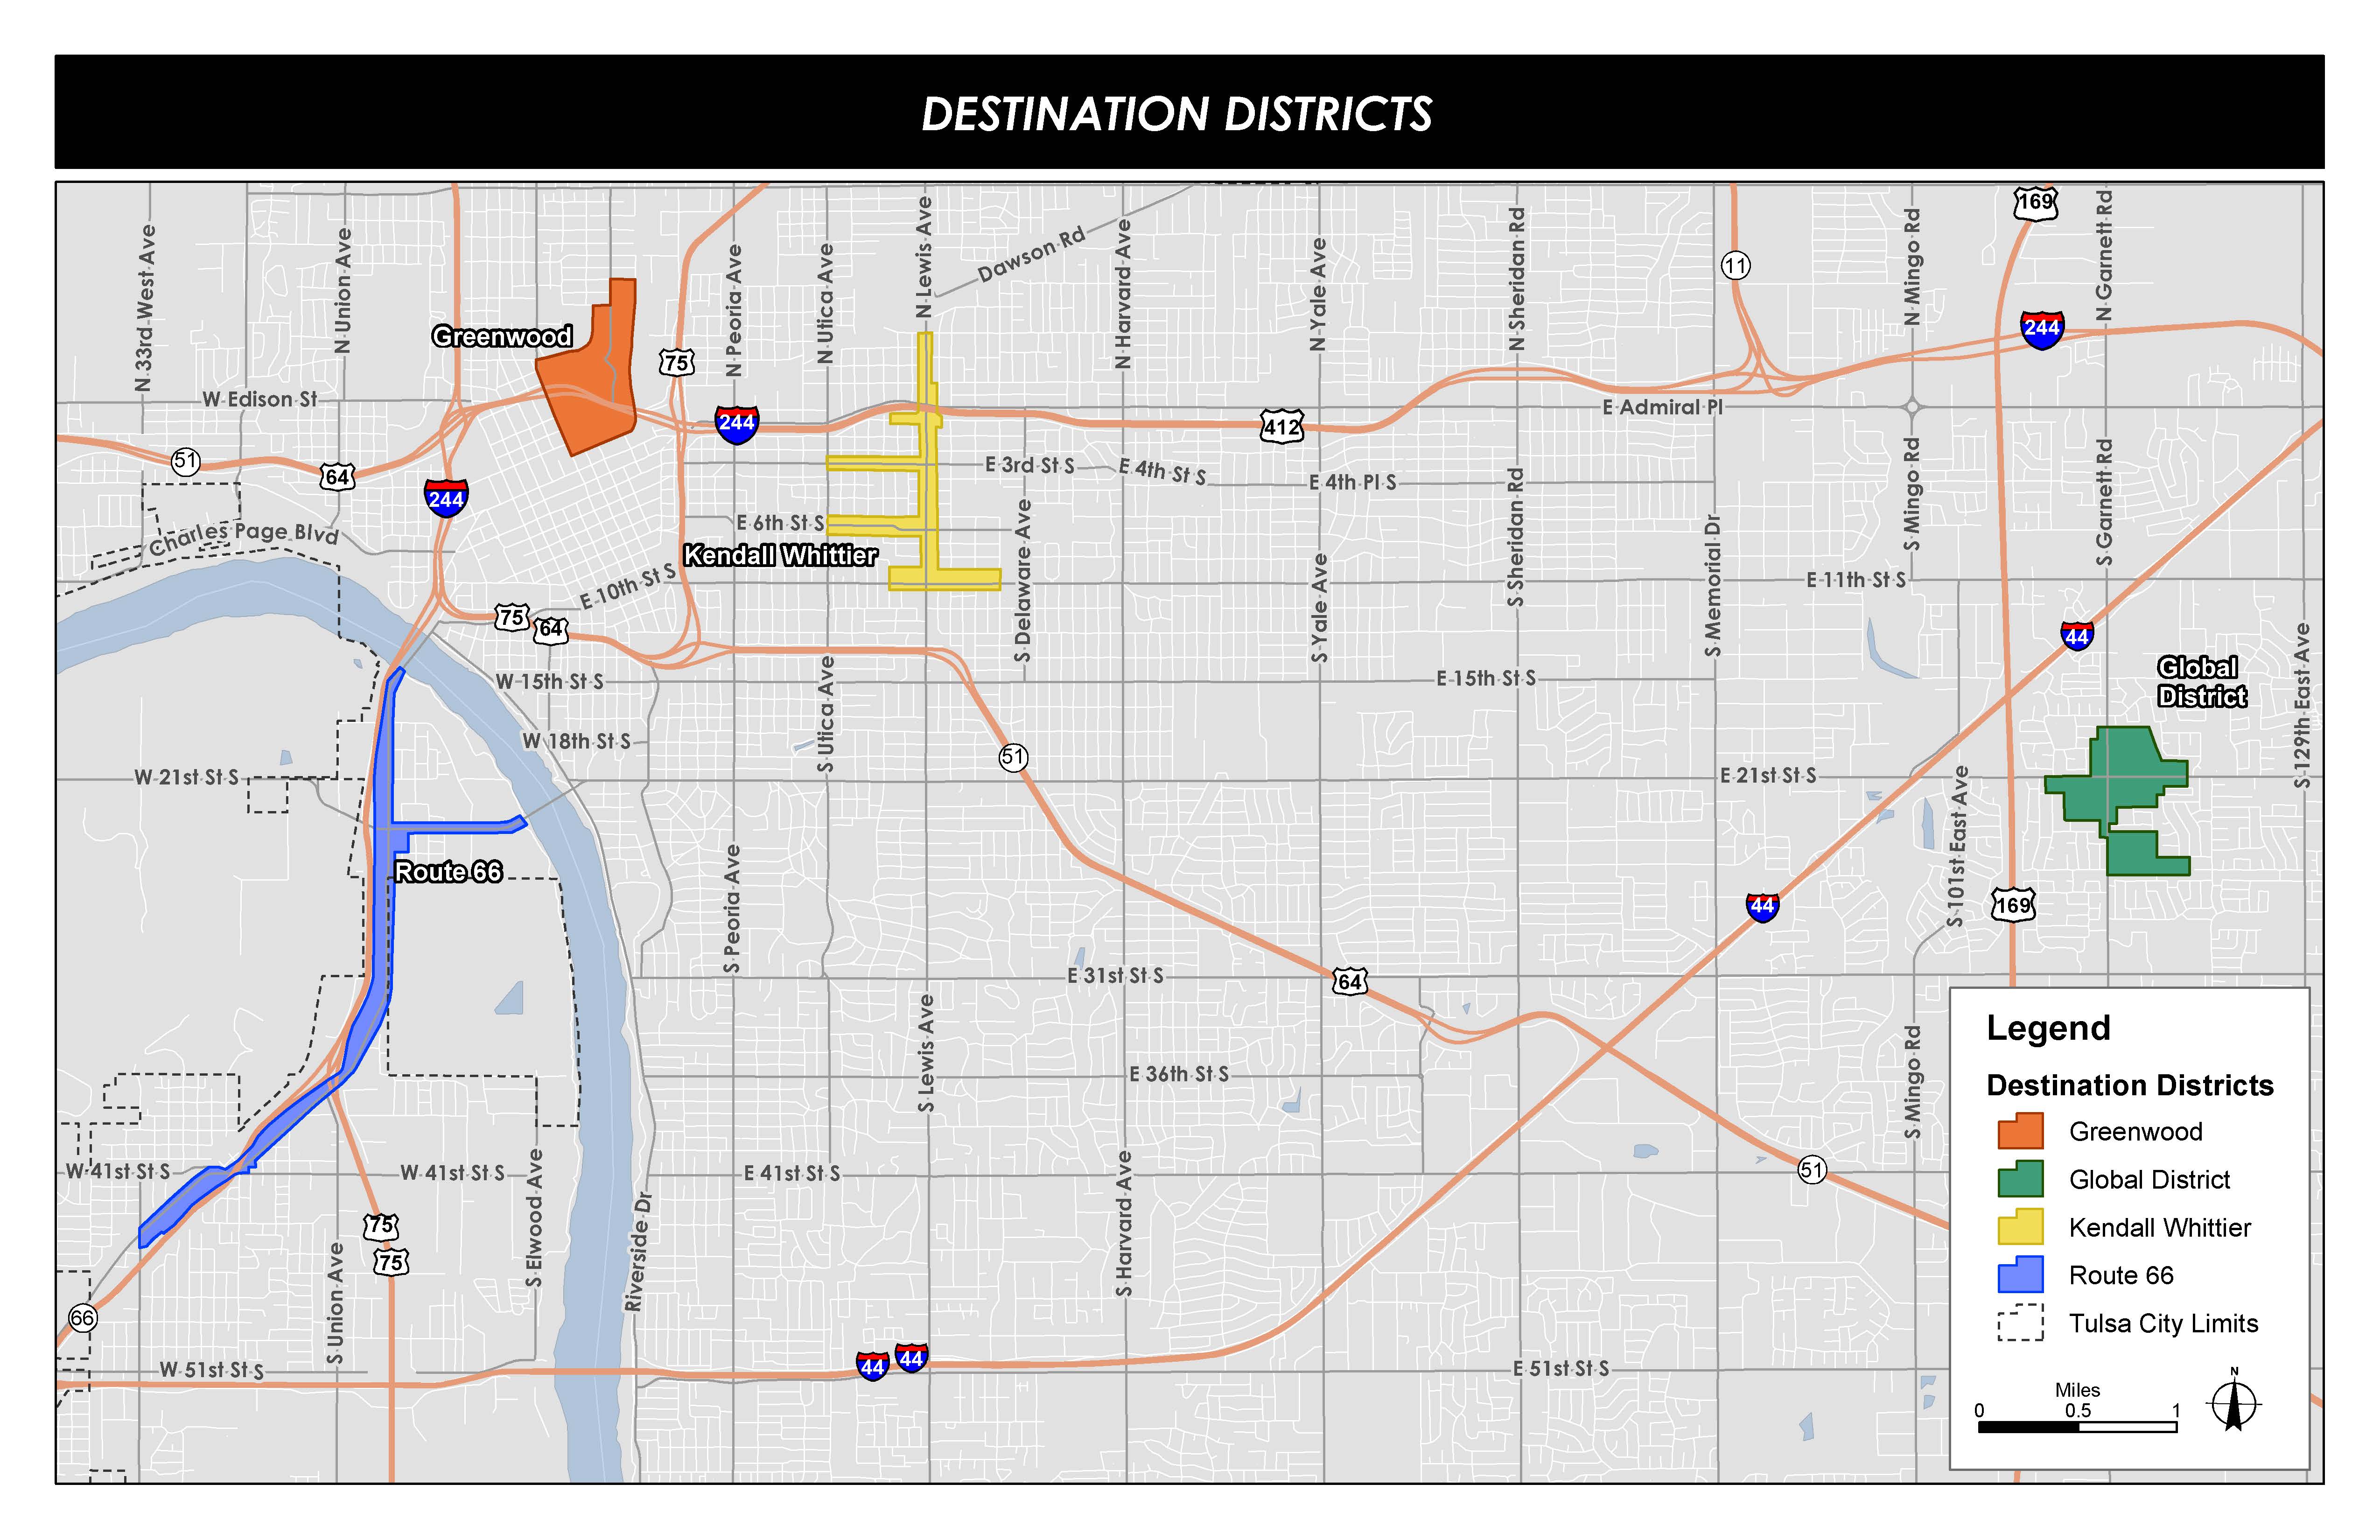 Map of Tulsa's Existing Destination Districts